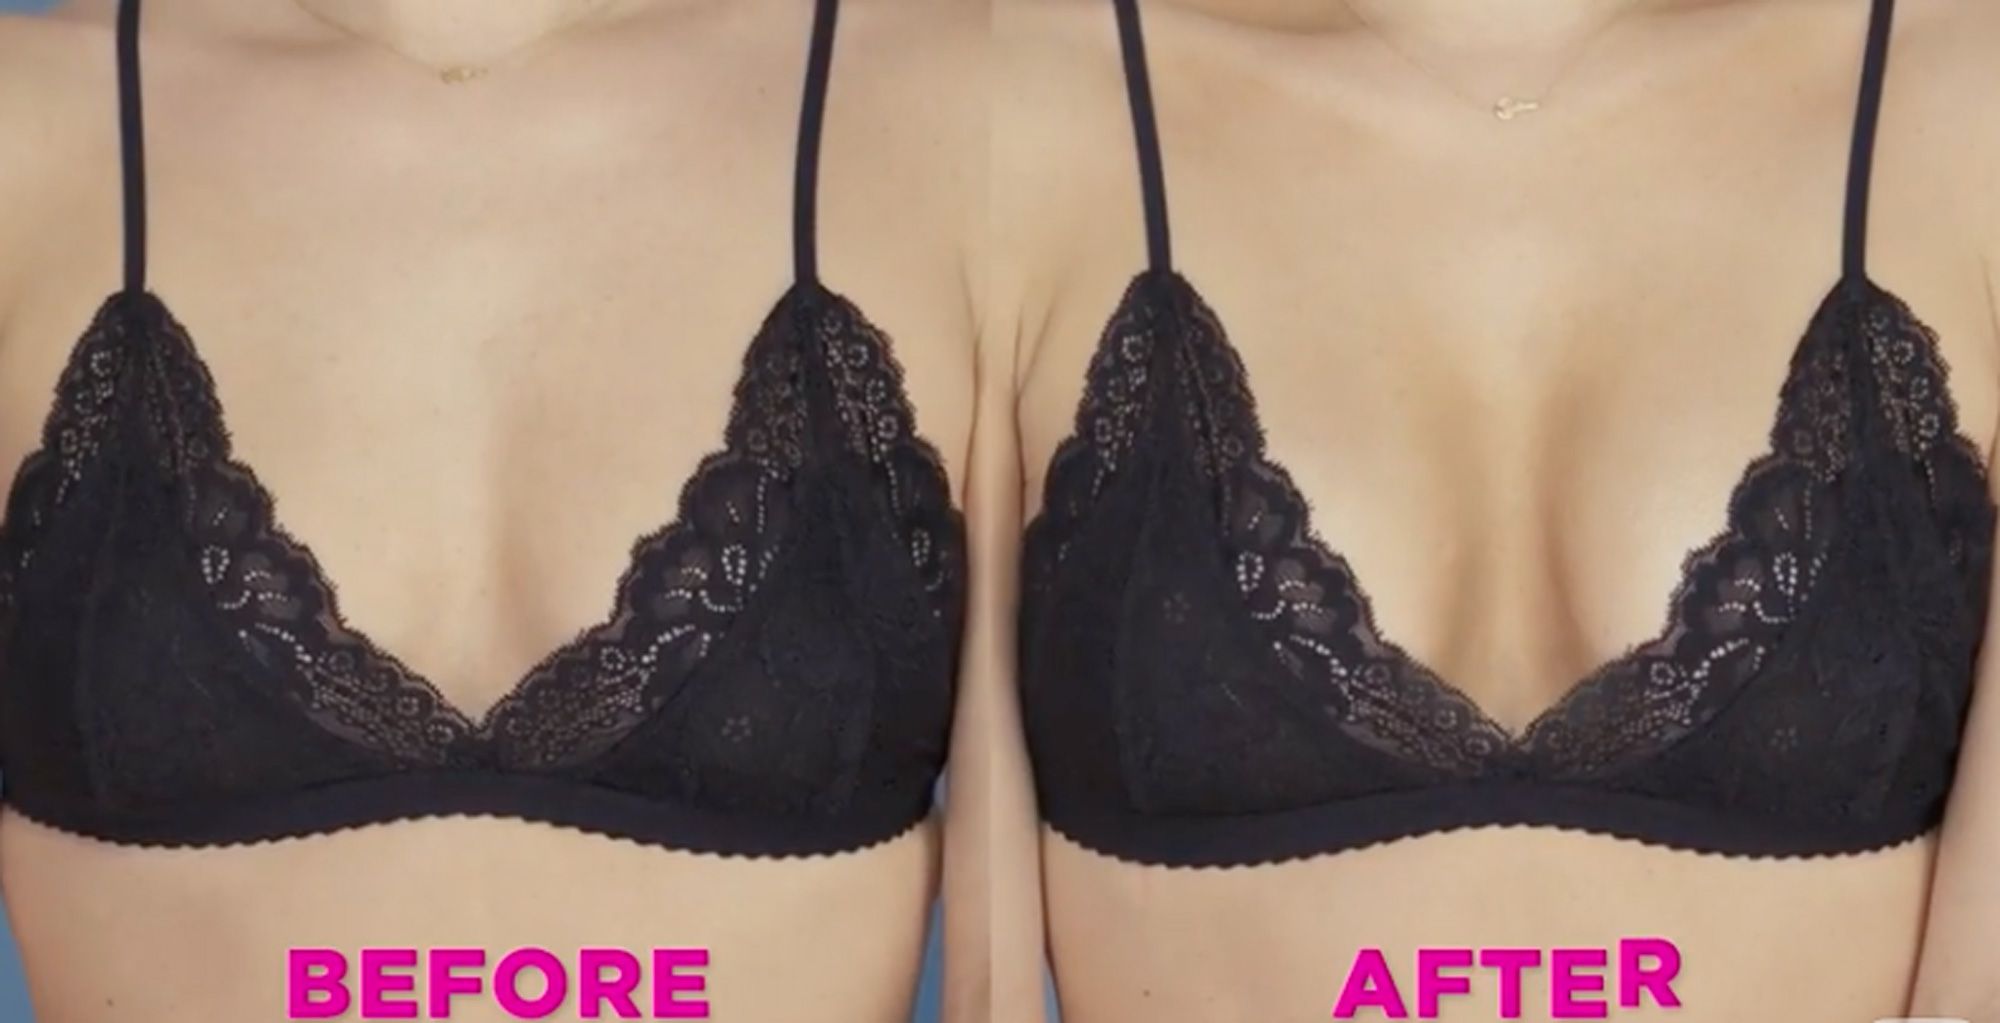 Make your breasts look bigger! Enhance your cleavage with makeup